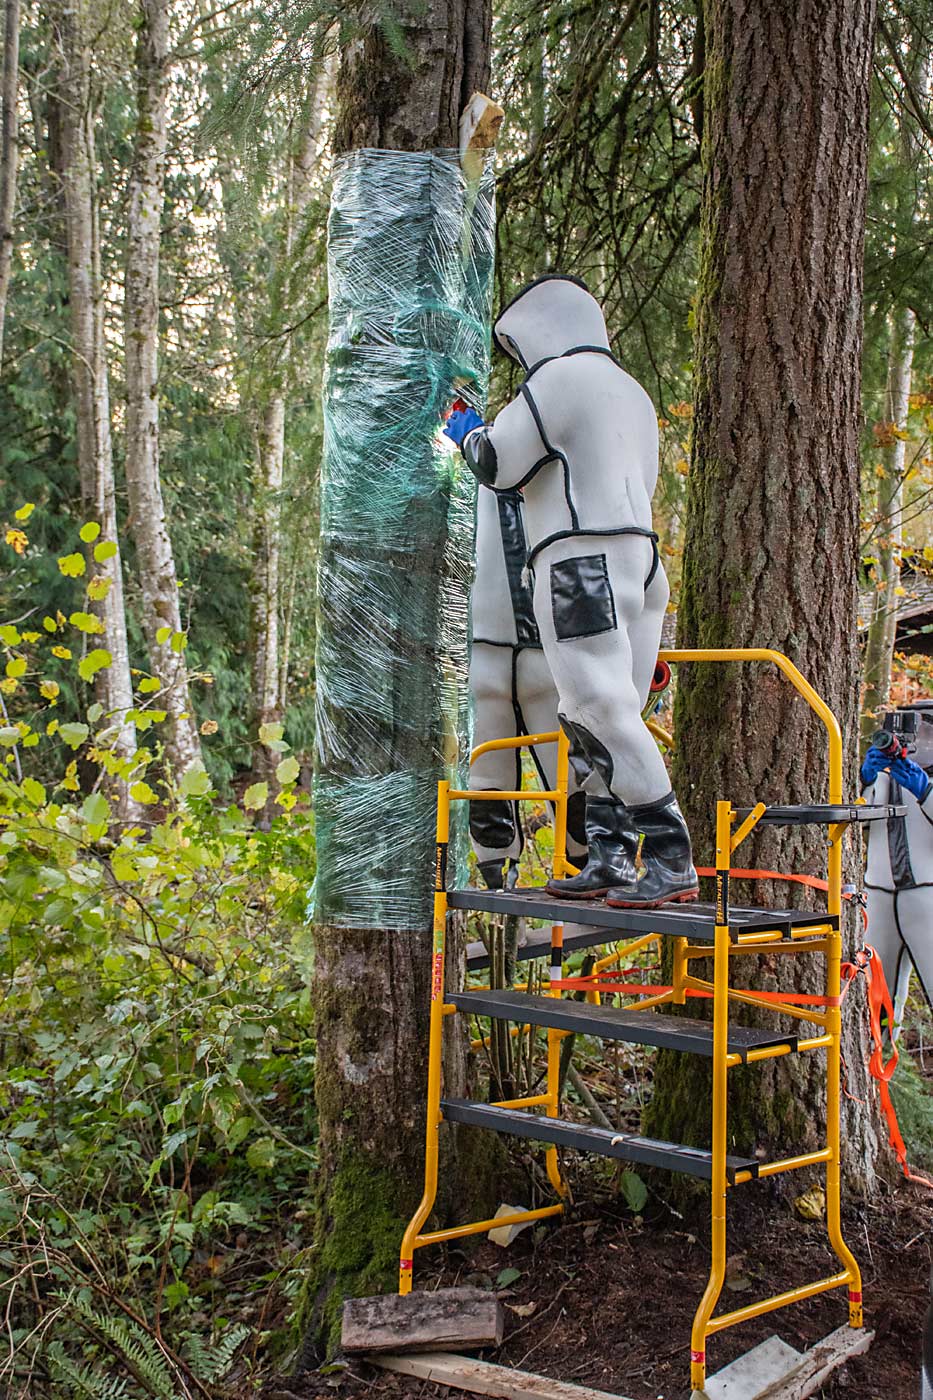 To eradicate the nest, located in a tree cavity, the WSDA team used foam and cellophane to seal up potential exits before vacuuming out the hornets. (Courtesy Washington State Department of Agriculture)